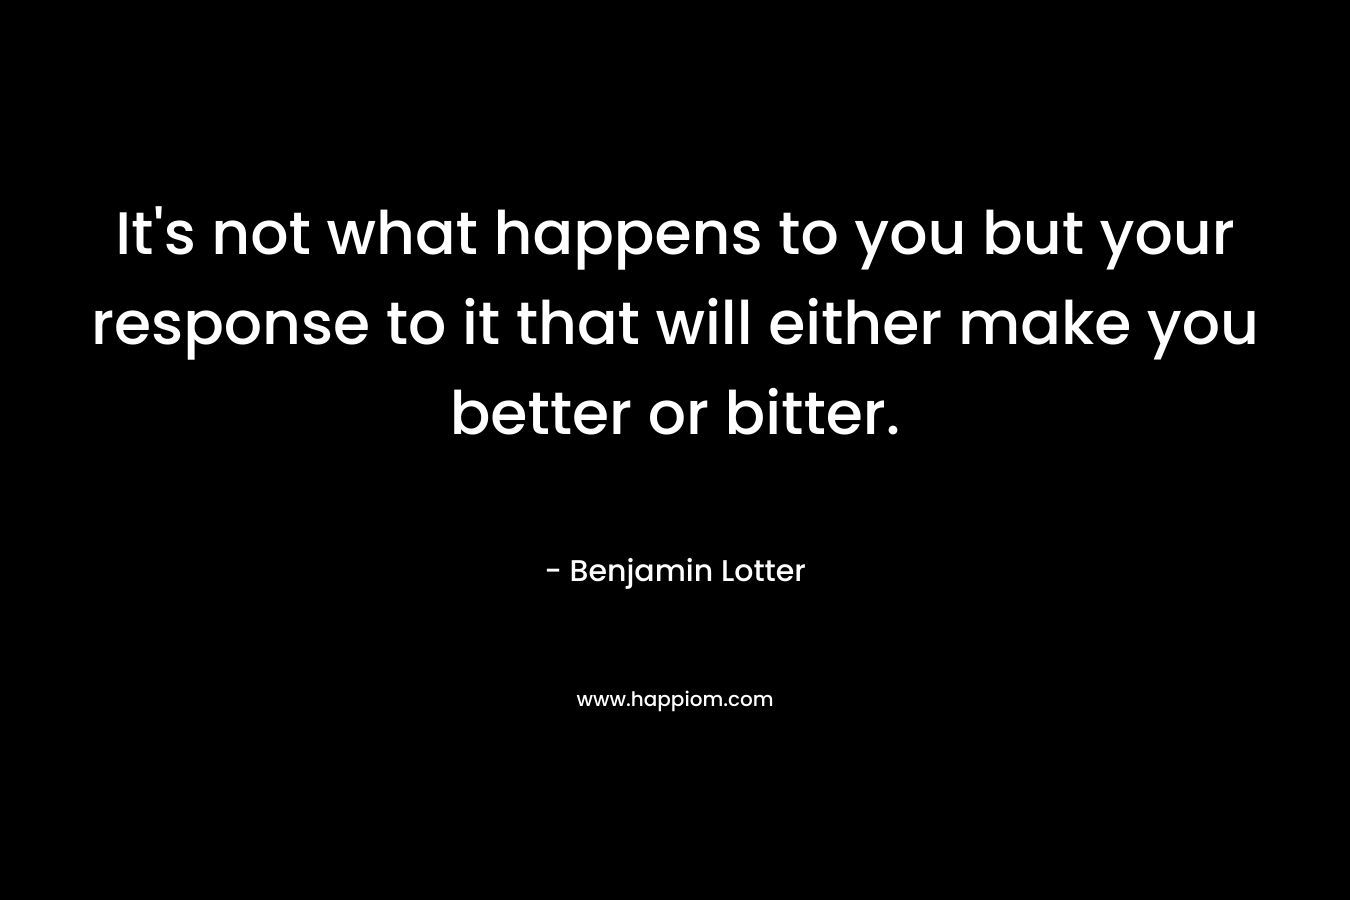 It's not what happens to you but your response to it that will either make you better or bitter.